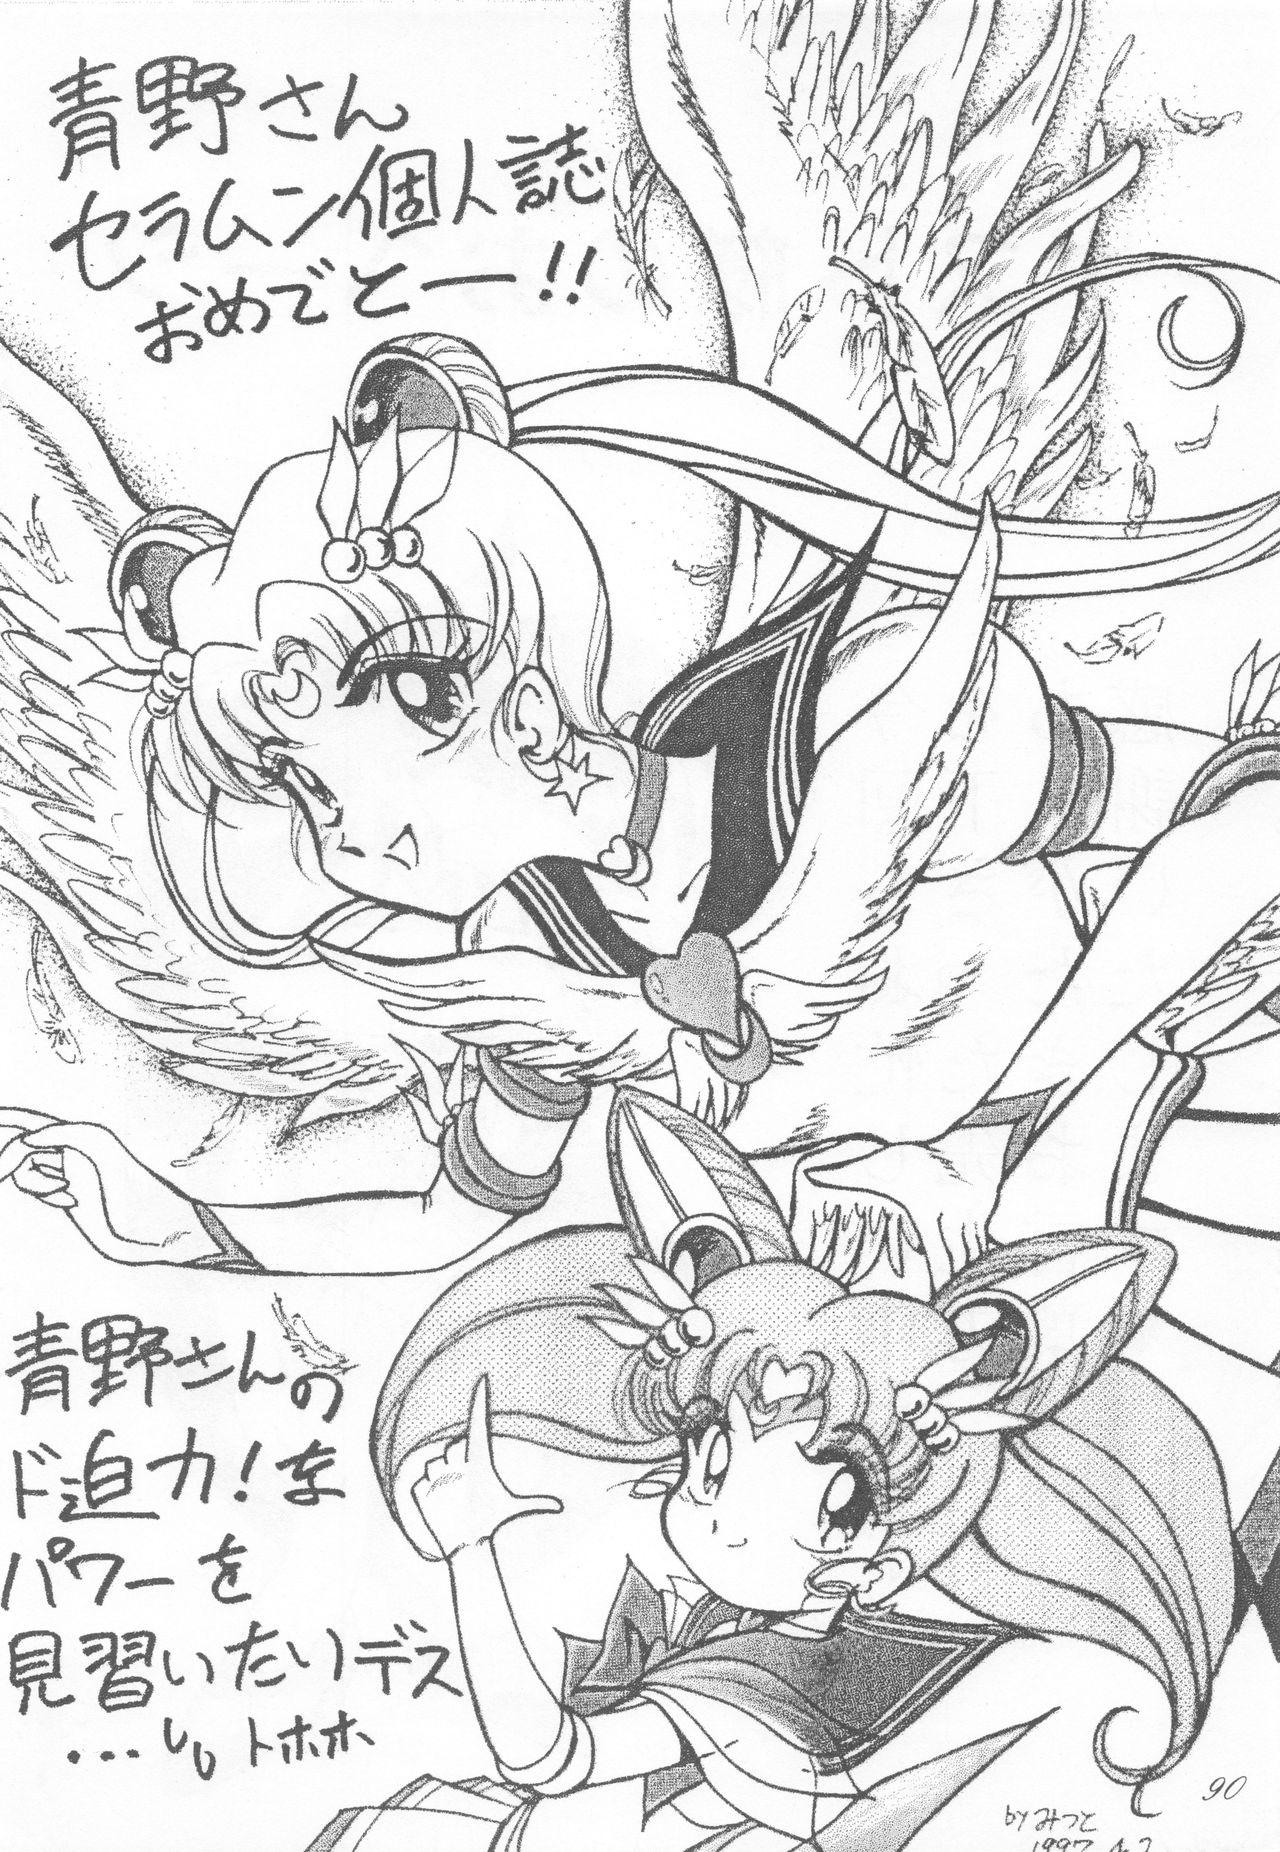 Sailor Moon 1 Page Gekijou P2 - SAILOR MOON ONE PAGE THEATER II 89